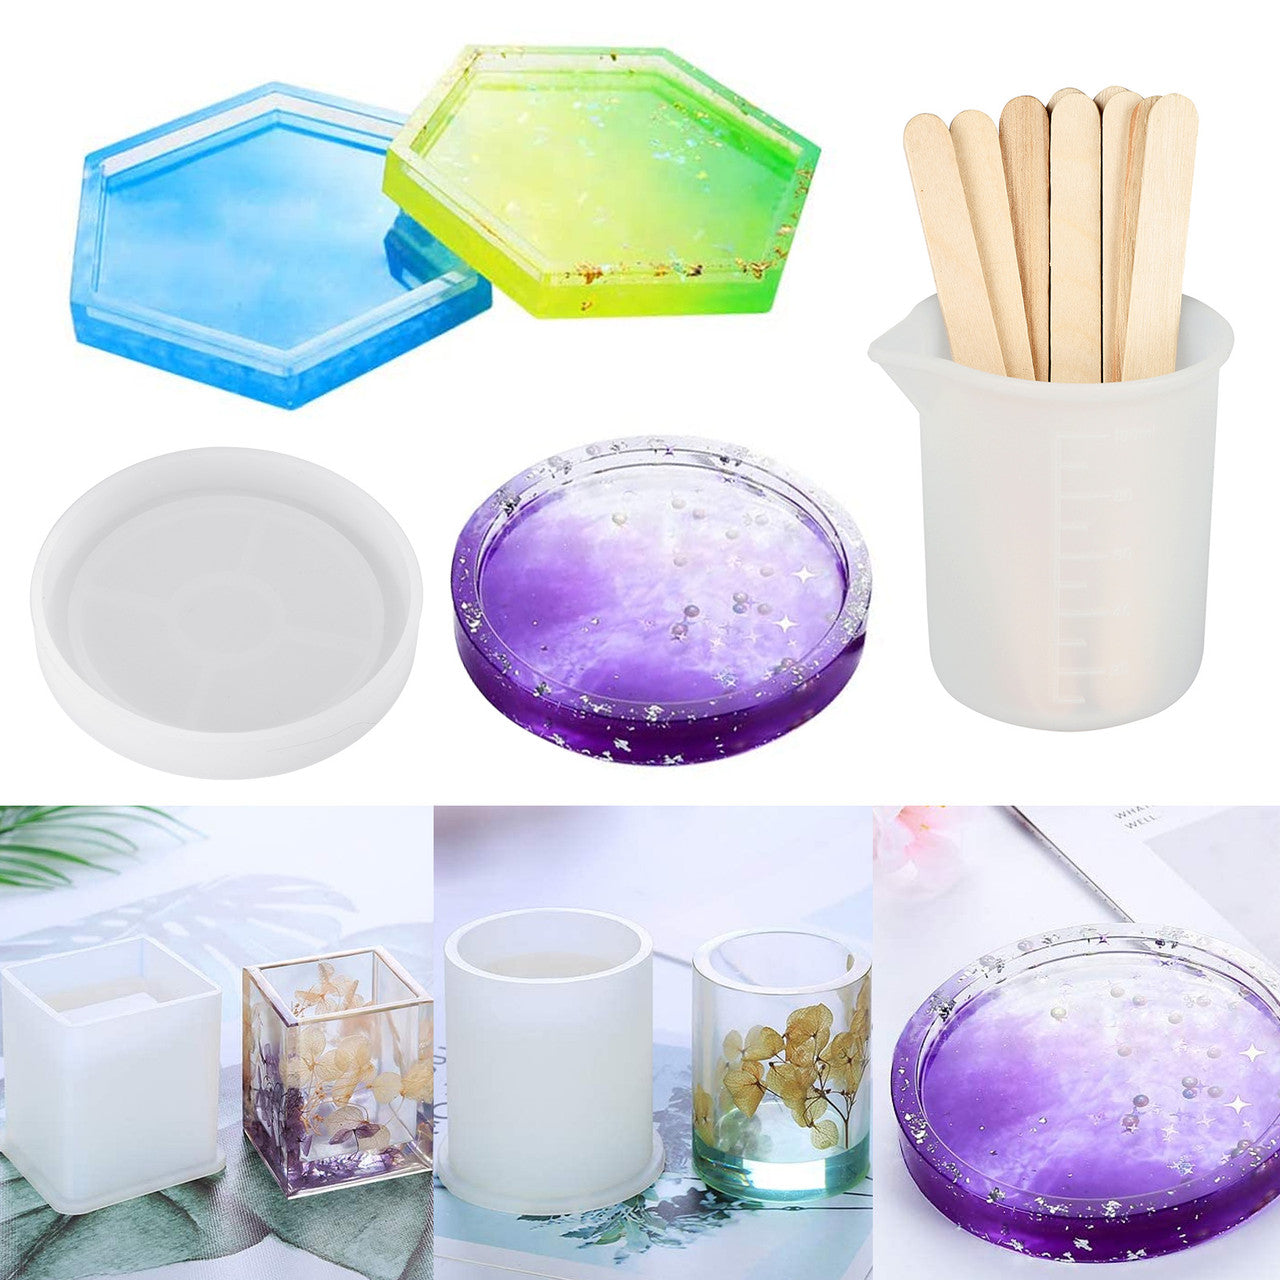 26Pcs Silicone Resin Casting Molds Tools Set, Includes Cube Pyramid Square Round Epoxy Molds, Measurement Cup and Sticks, for DIY Coaster, Pen Soap Candle Holder